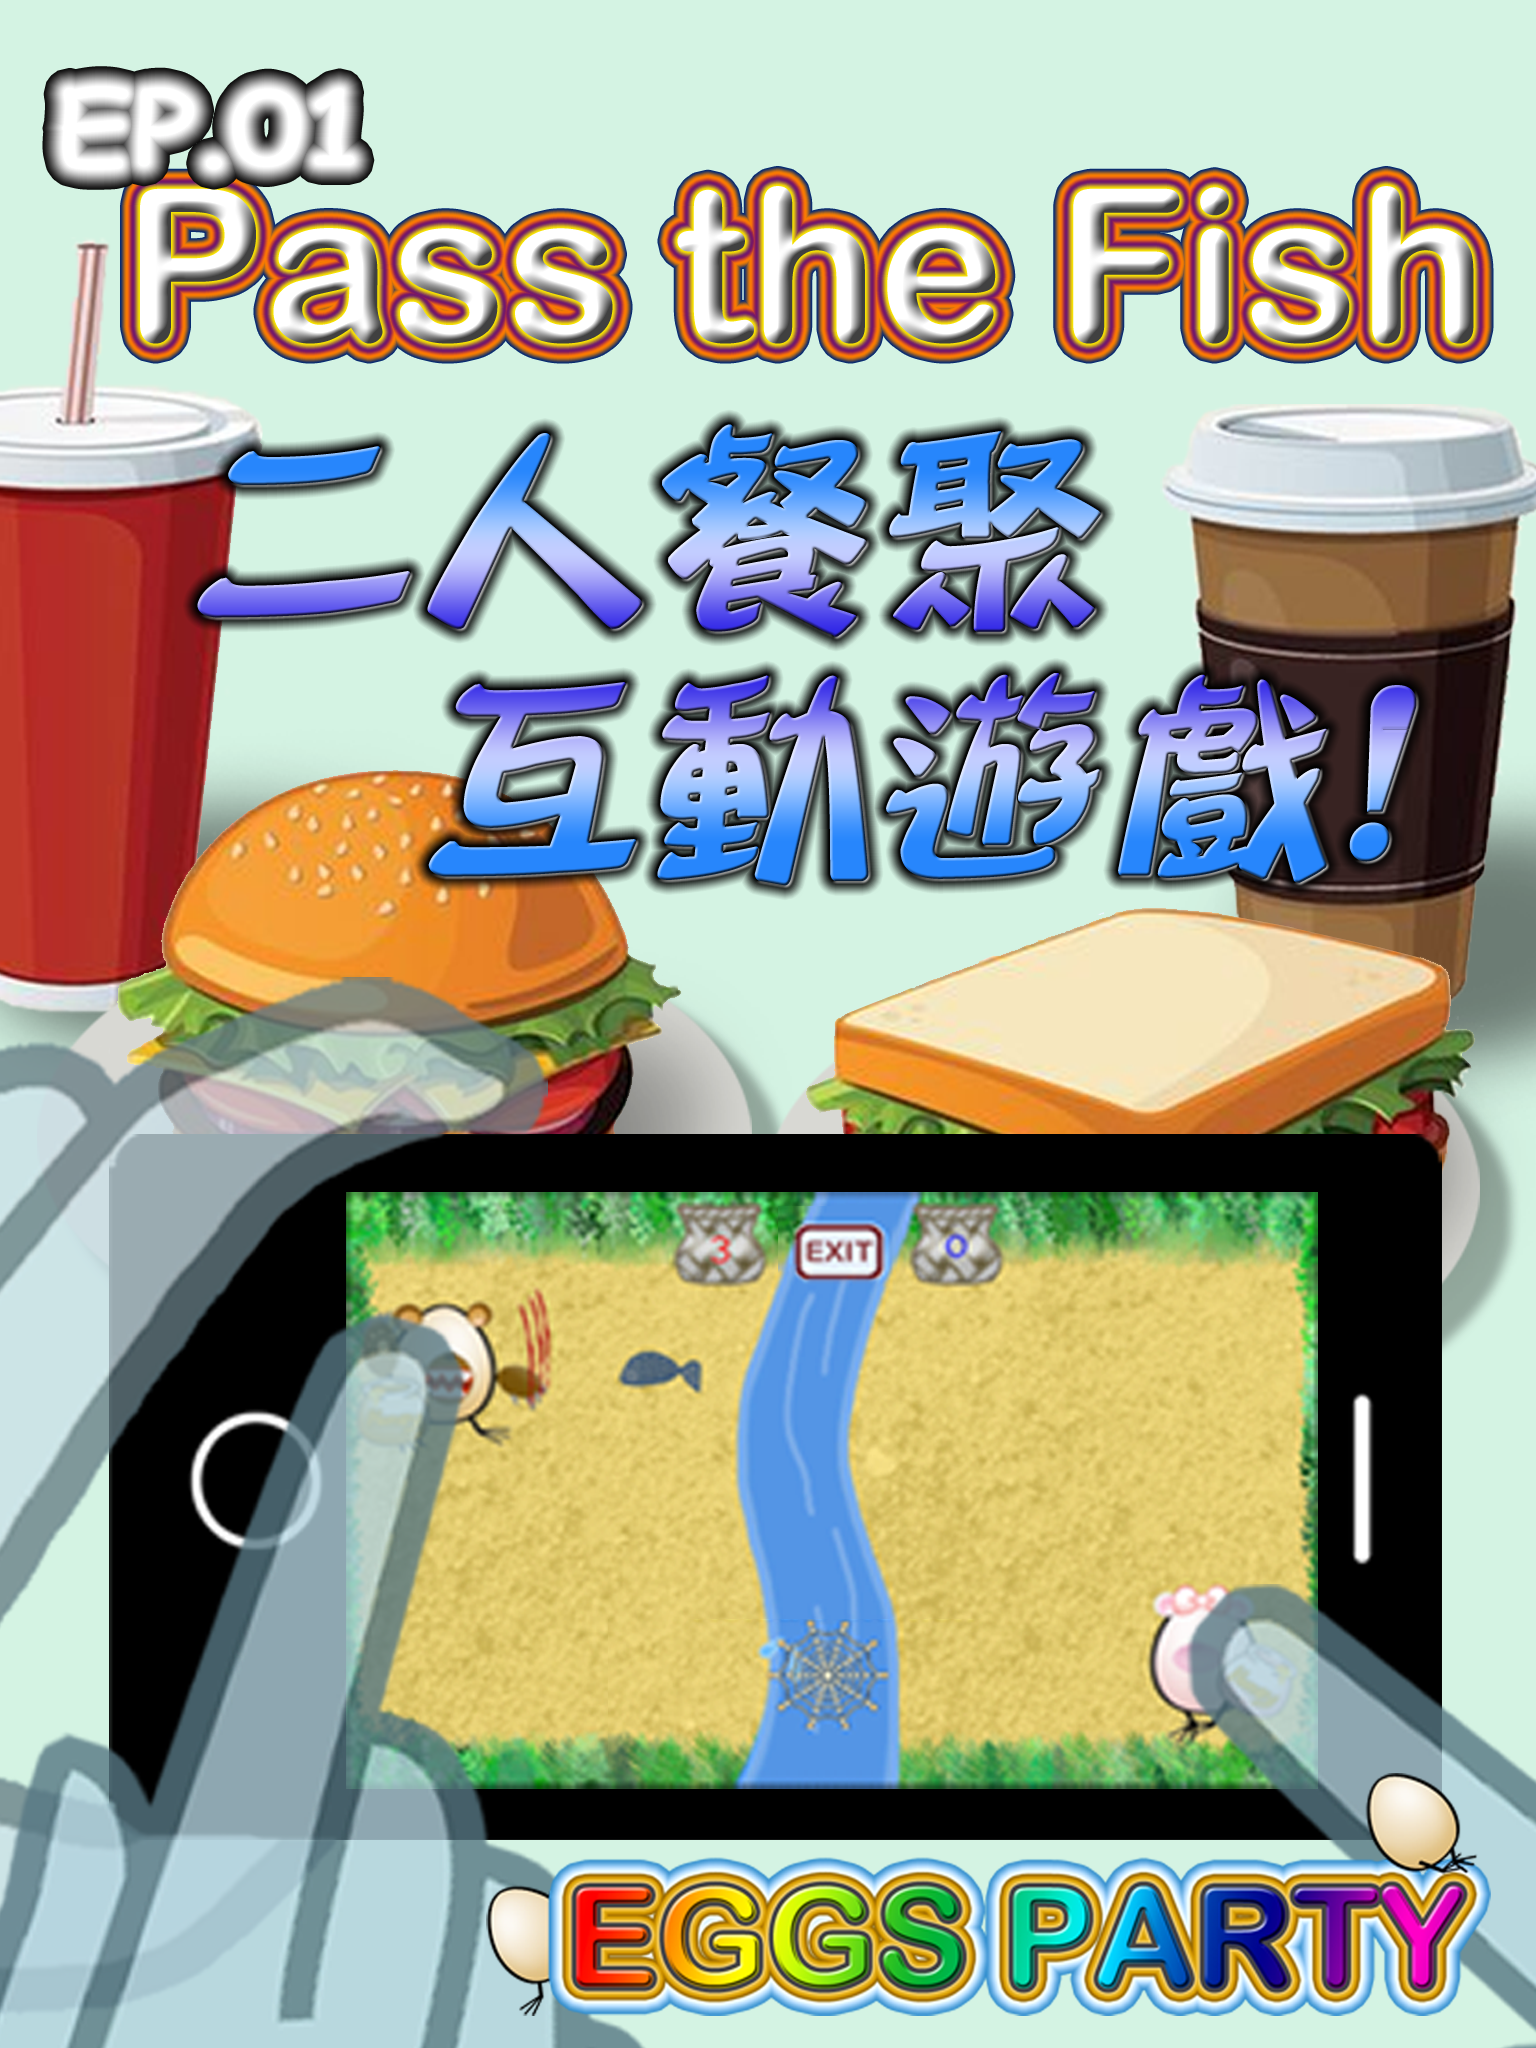 Eggs Party ep1：Pass The Fishのキャプチャ